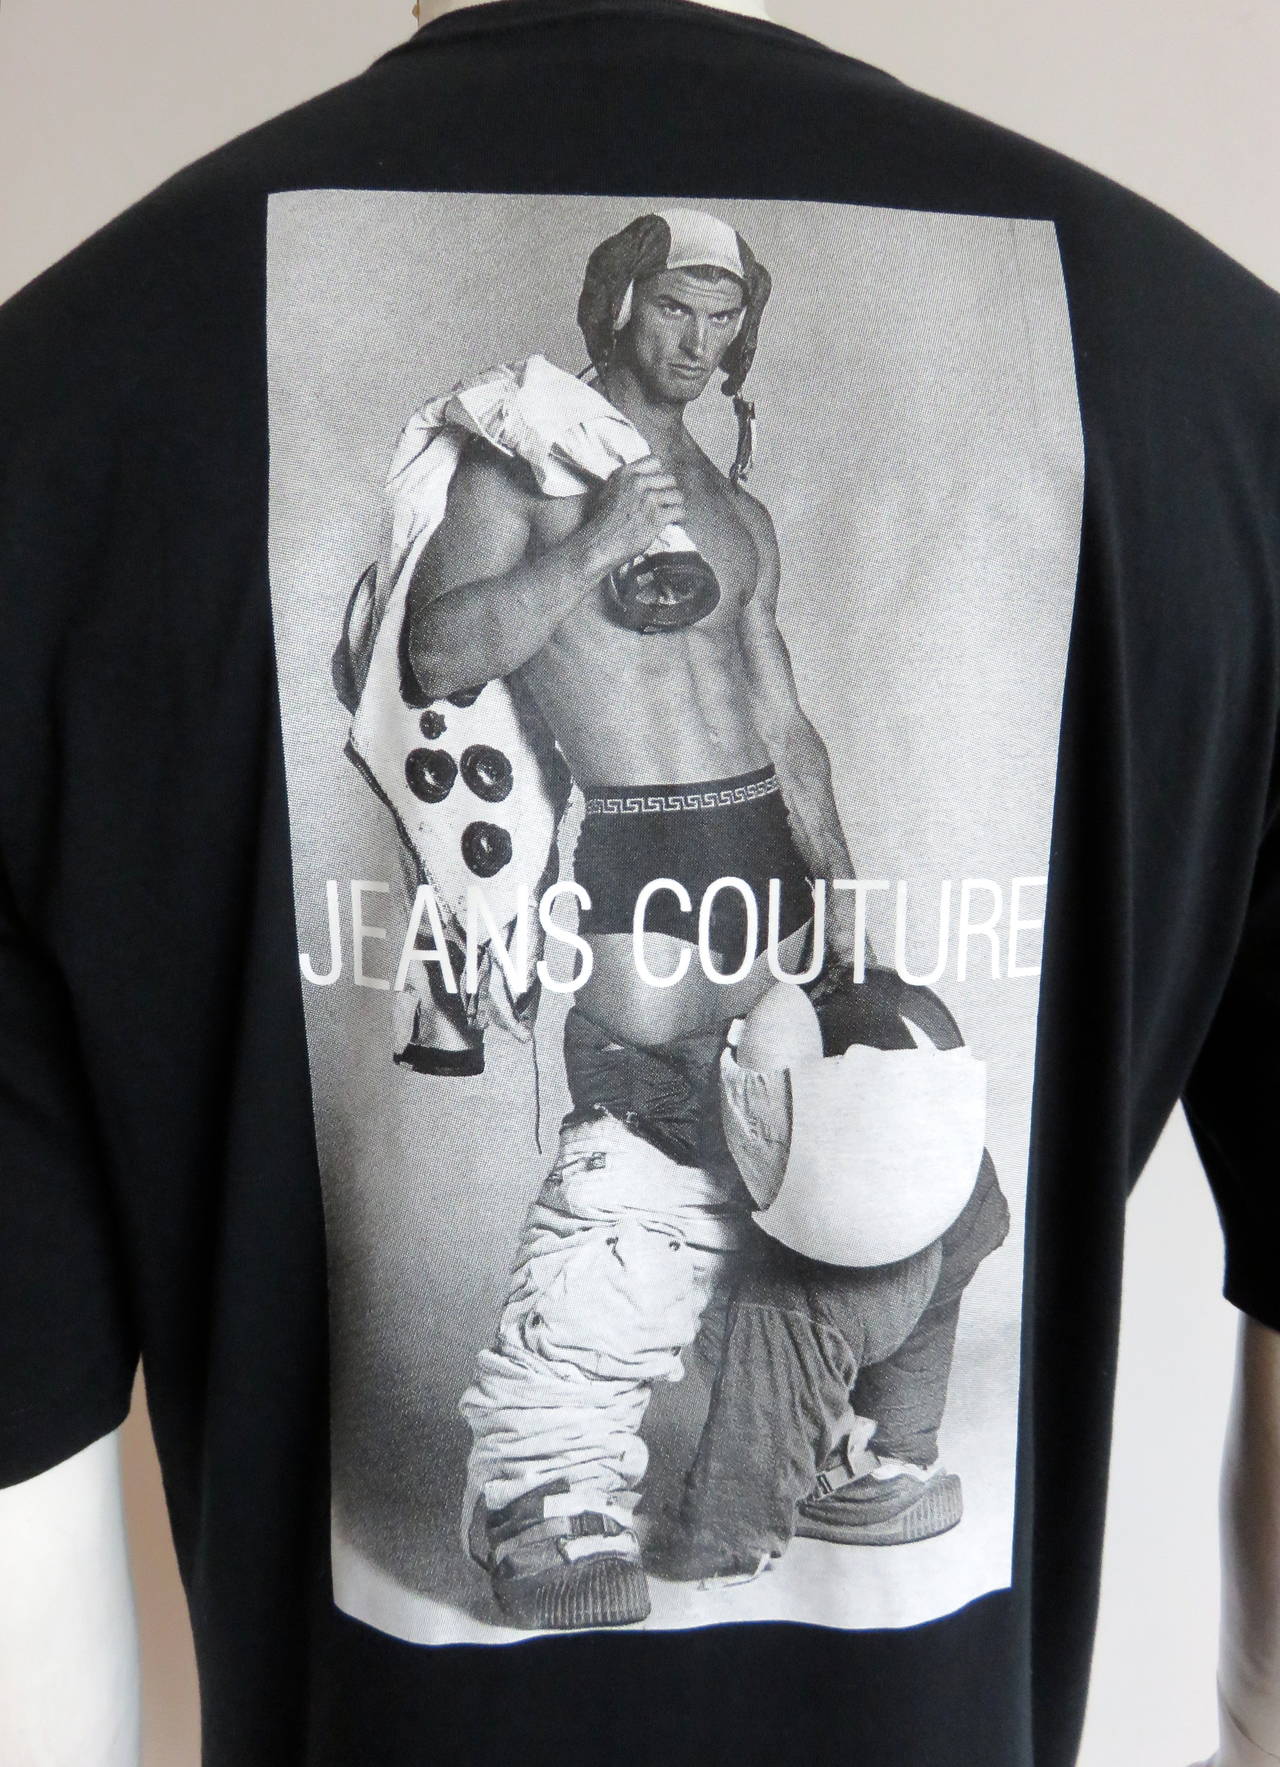 Never worn, 1990's VERSACE JEANS COUTURE t-shirt featuring, BRUCE WEBER photo print at front and back.

Large 'VERSACE' logo at front with male model in (and out of) astronaut suit at front and back.

Small logo plate at bottom of the wearer's